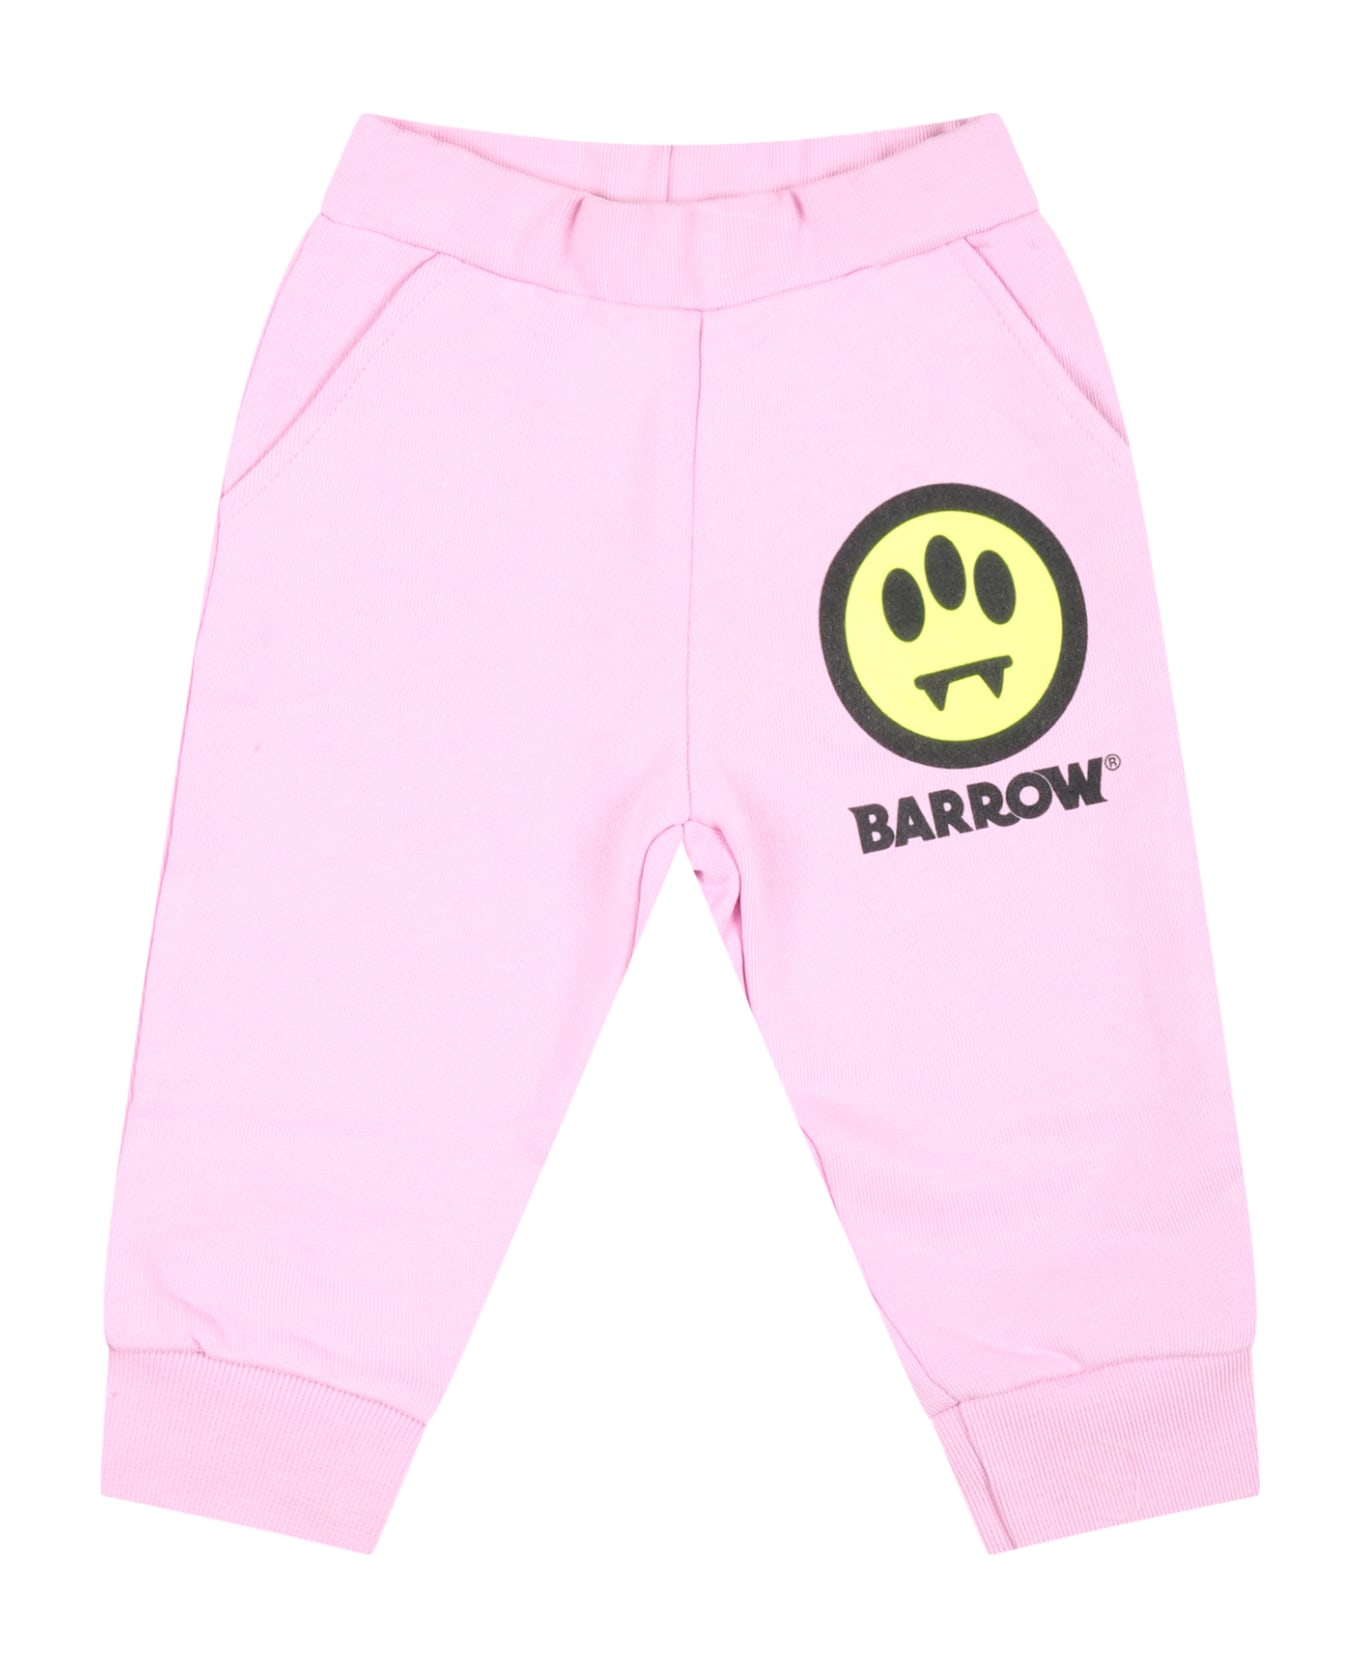 Barrow Pink Sweatpants For Baby Girl With Logo - Pink